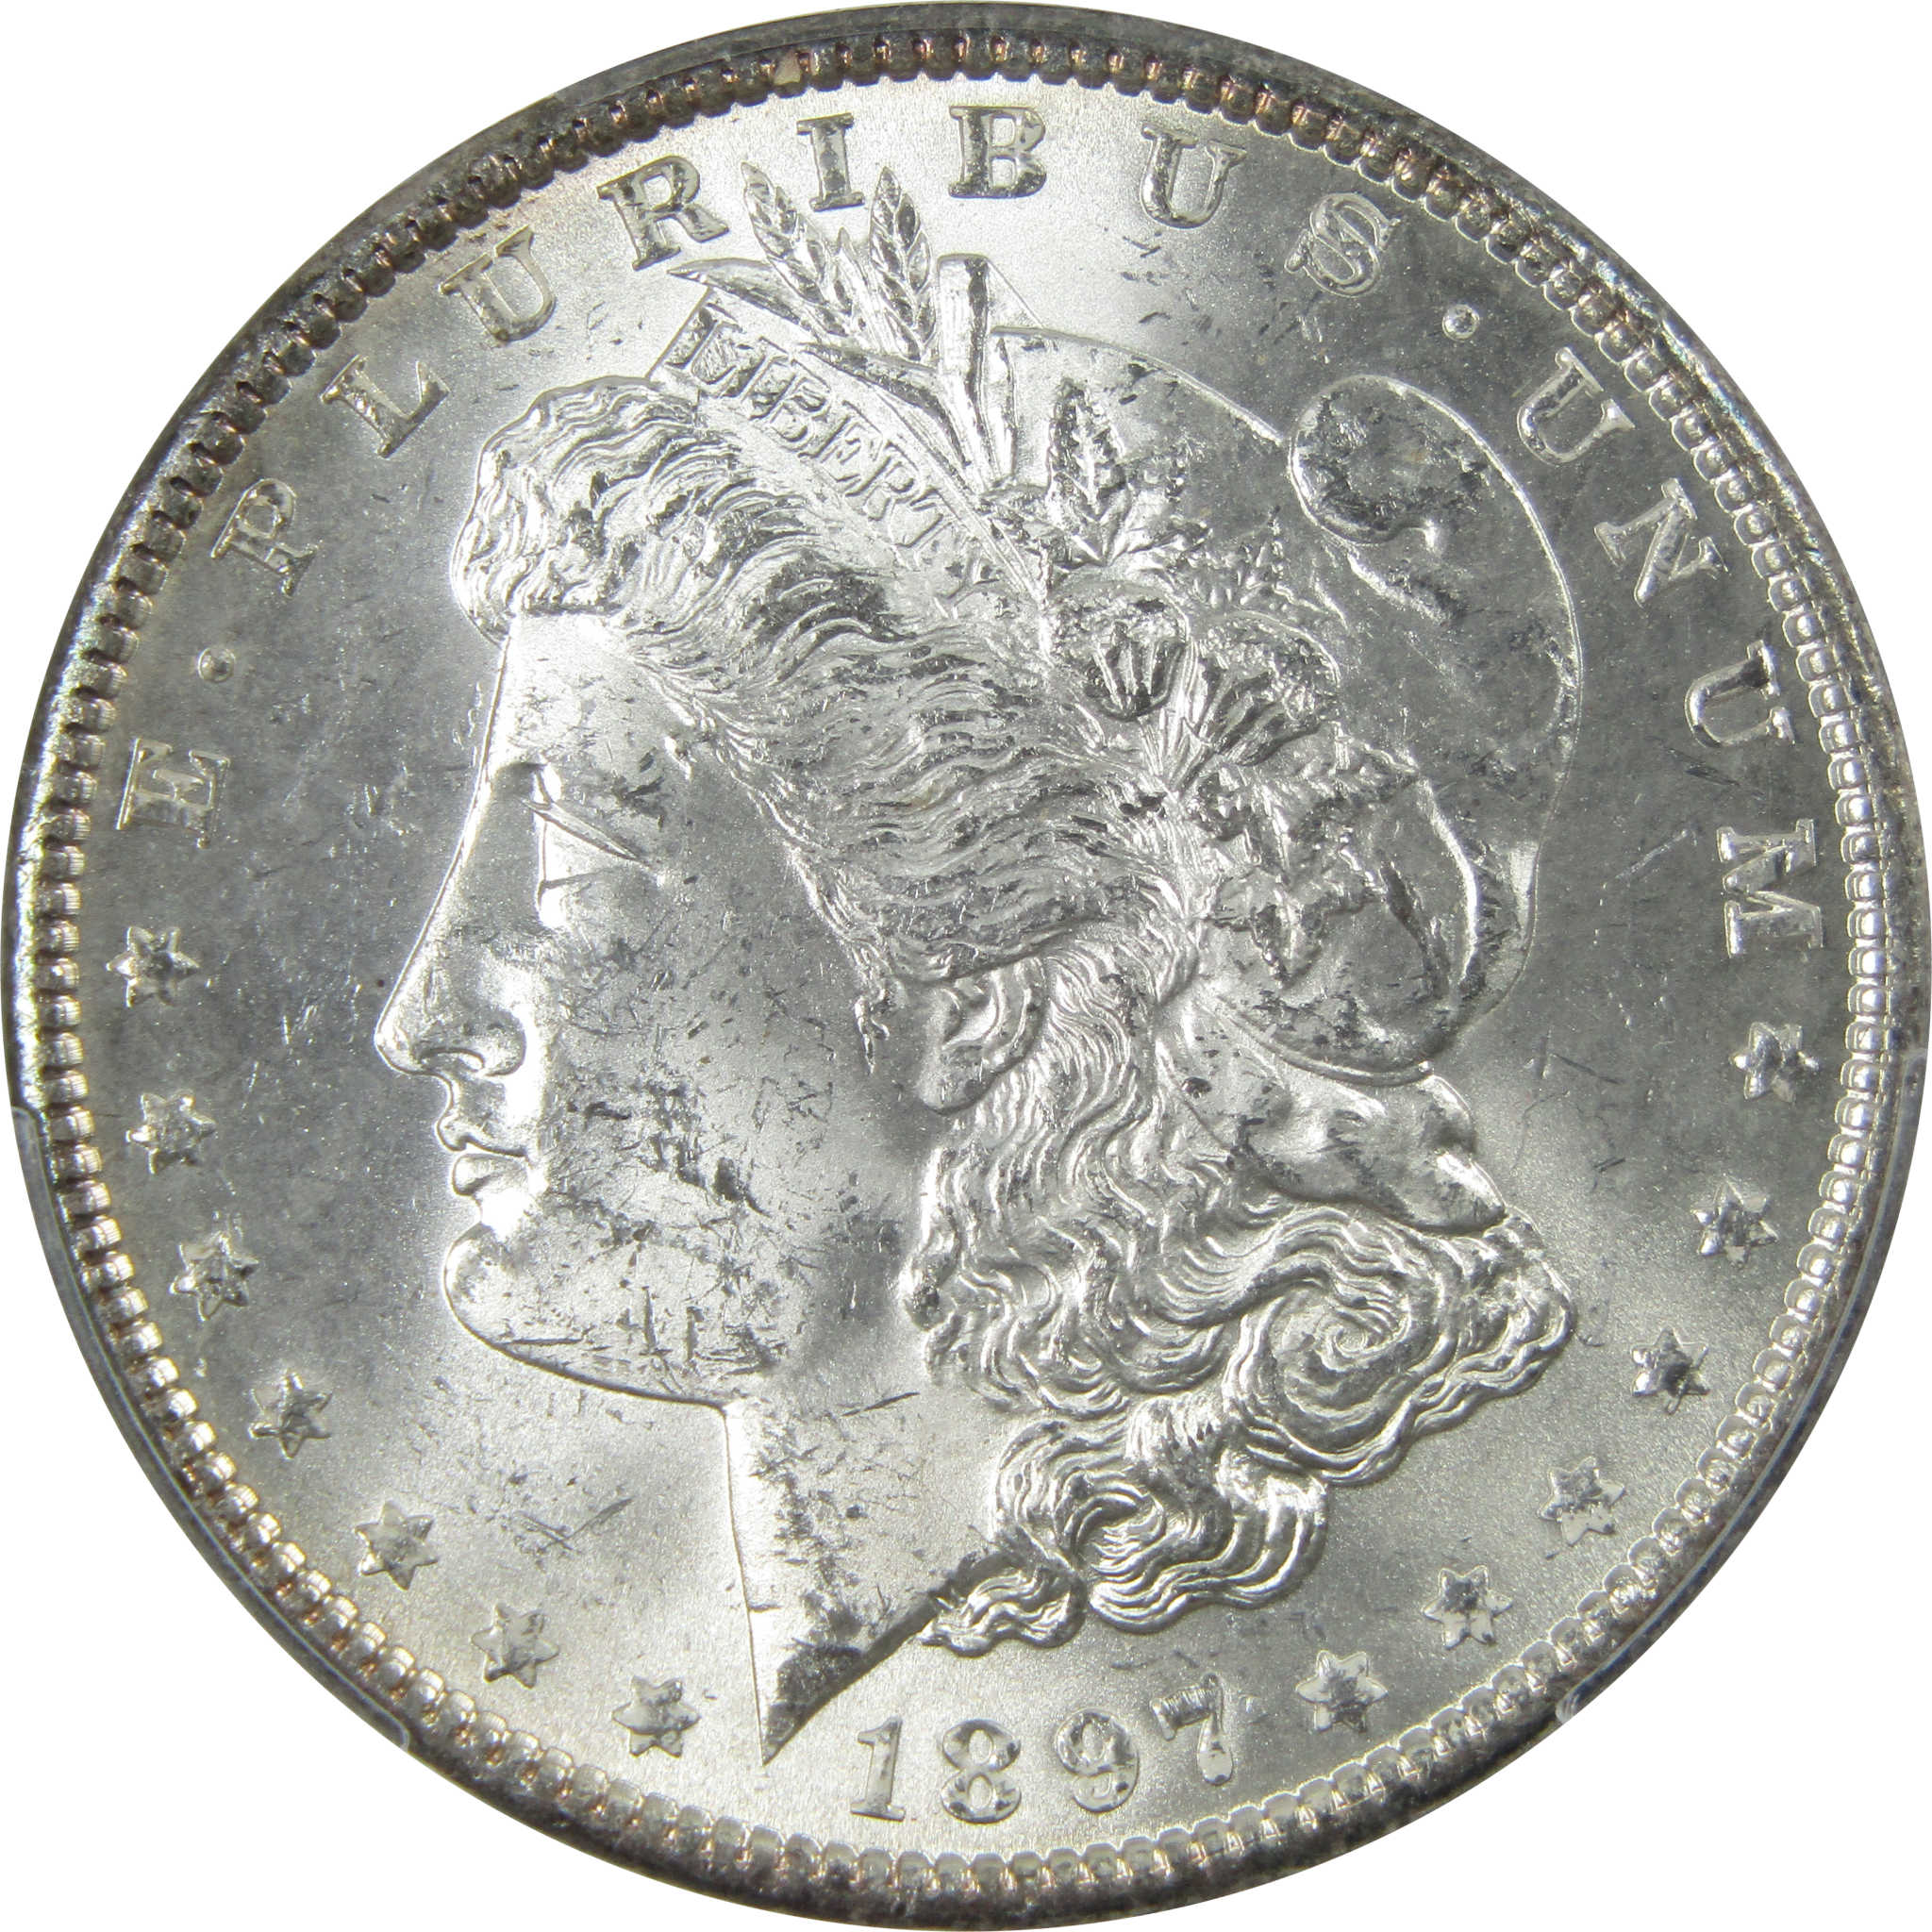 1897 Morgan Dollar MS 63 PCGS Silver $1 Uncirculated Coin SKU:I13922 - Morgan coin - Morgan silver dollar - Morgan silver dollar for sale - Profile Coins &amp; Collectibles